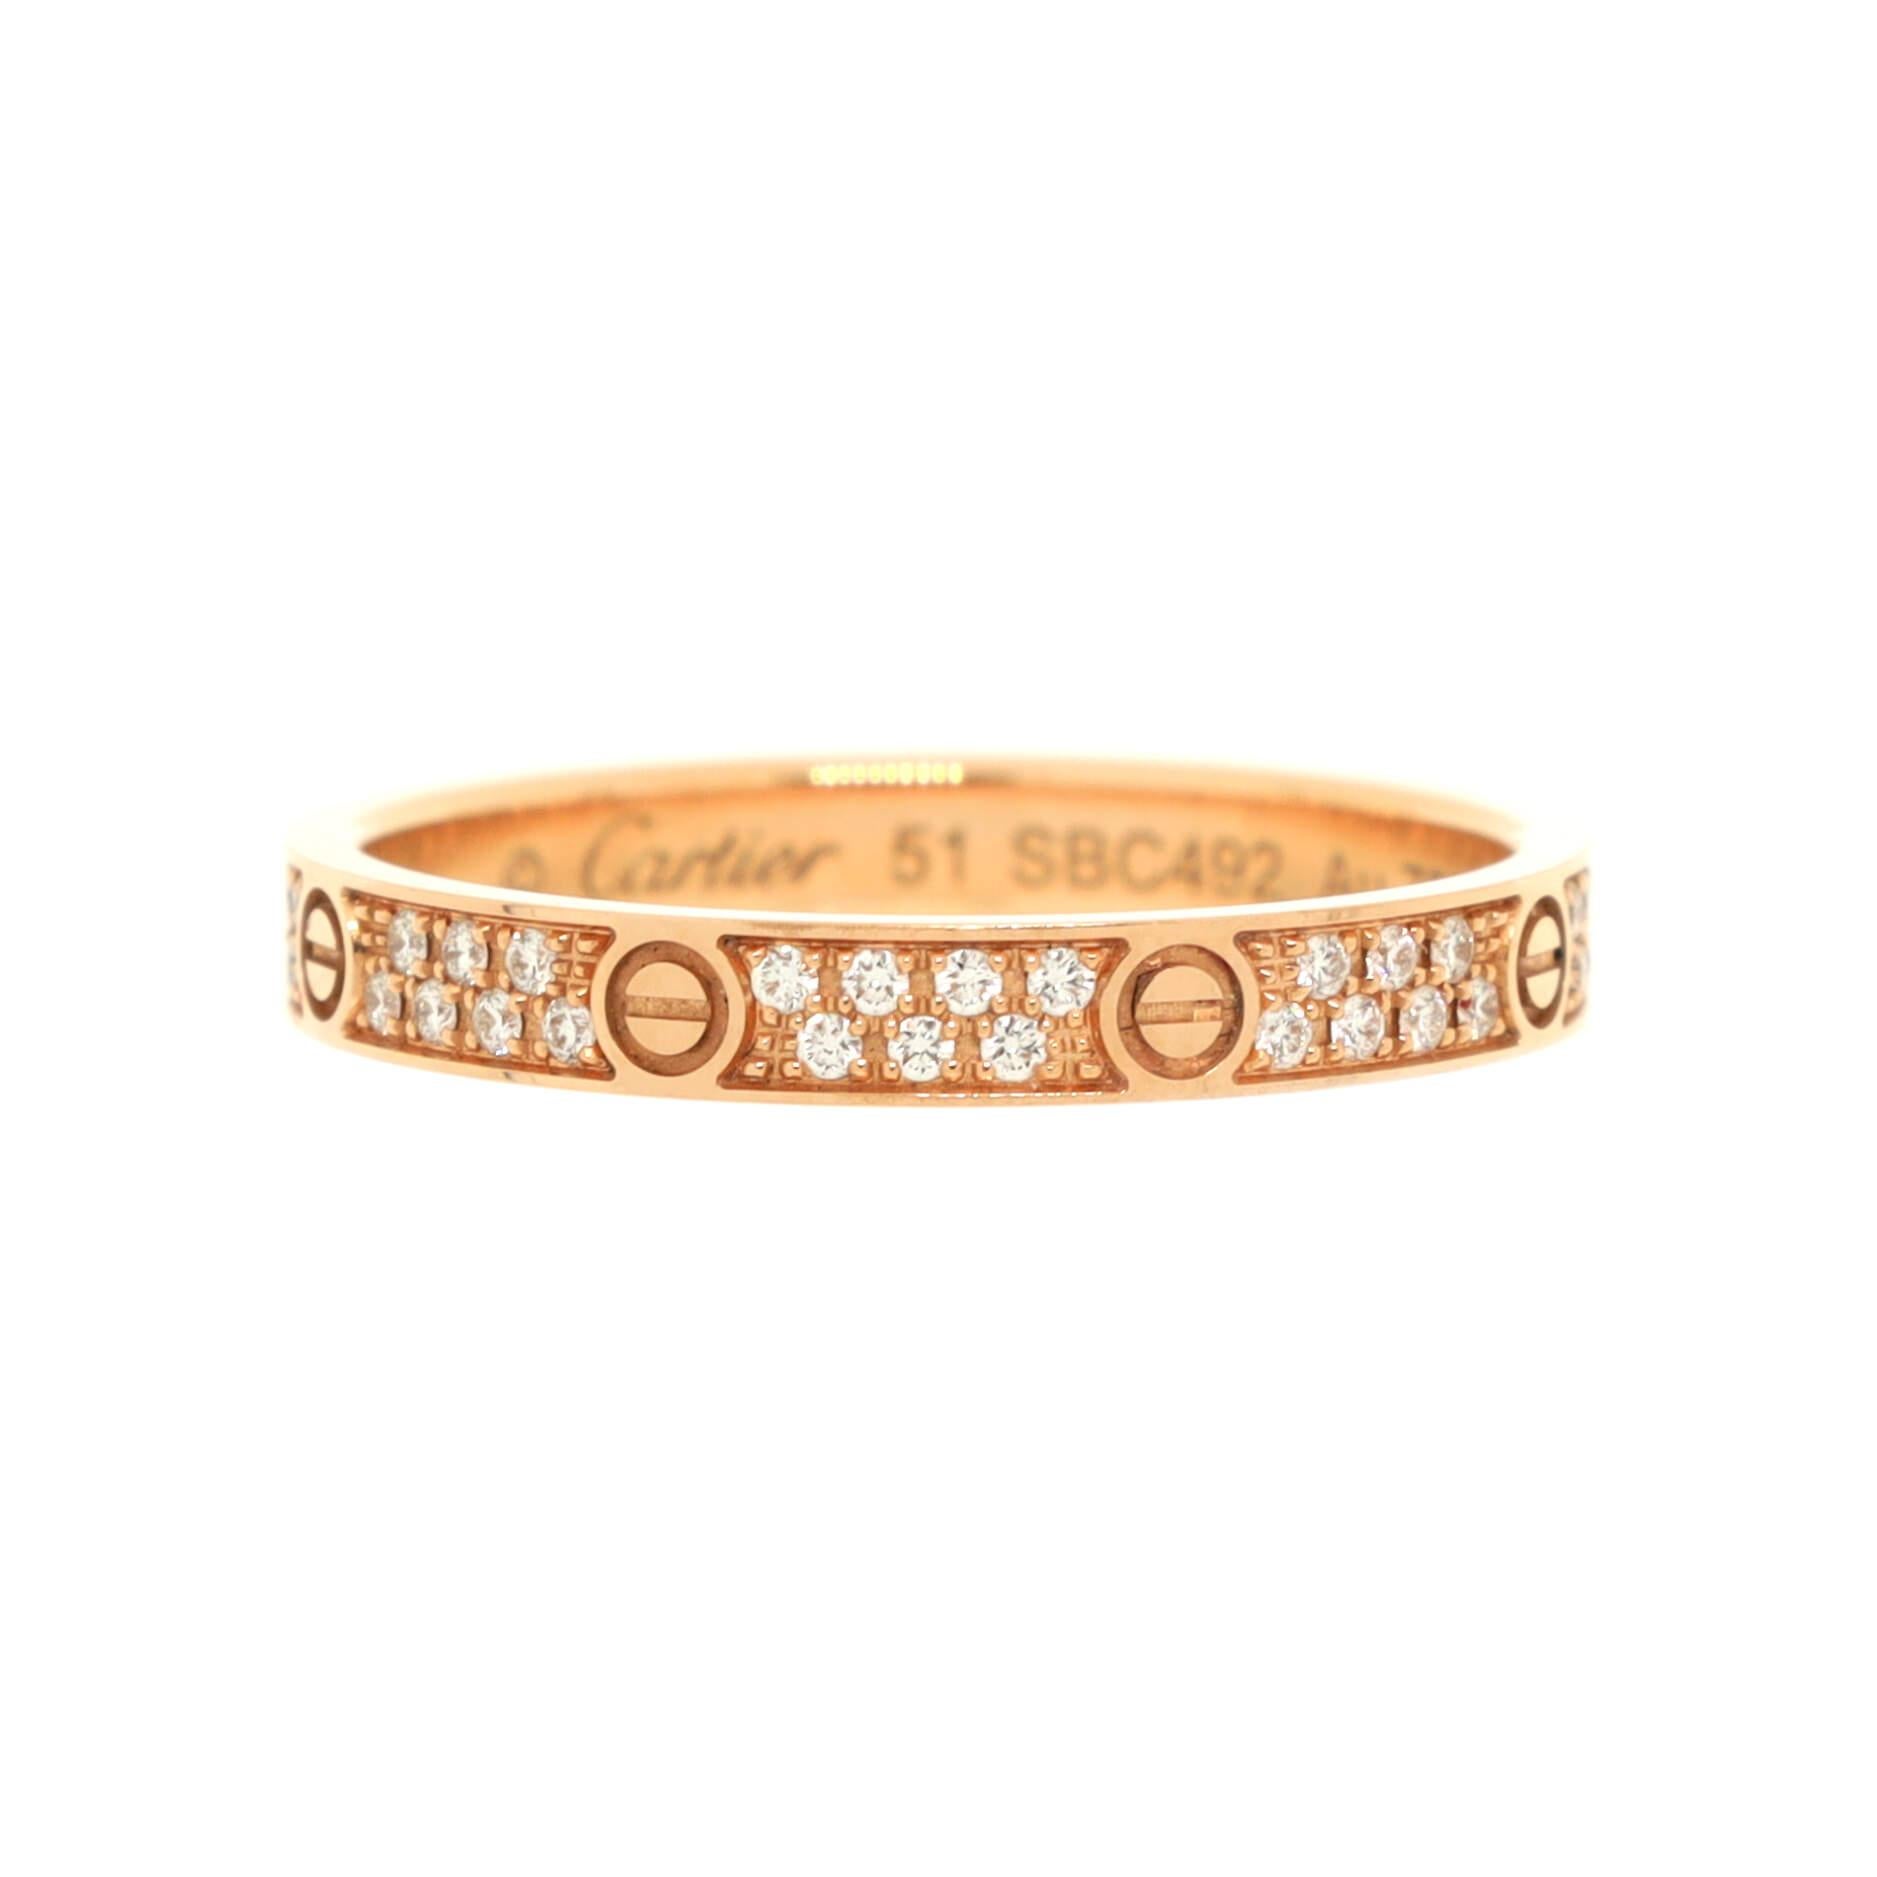 Condition: Excellent. Faint wear throughout.
Accessories: No Accessories
Measurements: Size: 5.75 - 51, Width: 2.60 mm
Designer: Cartier
Model: Love Wedding Band Pave Diamonds Ring 18K Rose Gold and Diamonds Small
Exterior Color: Rose Gold
Item